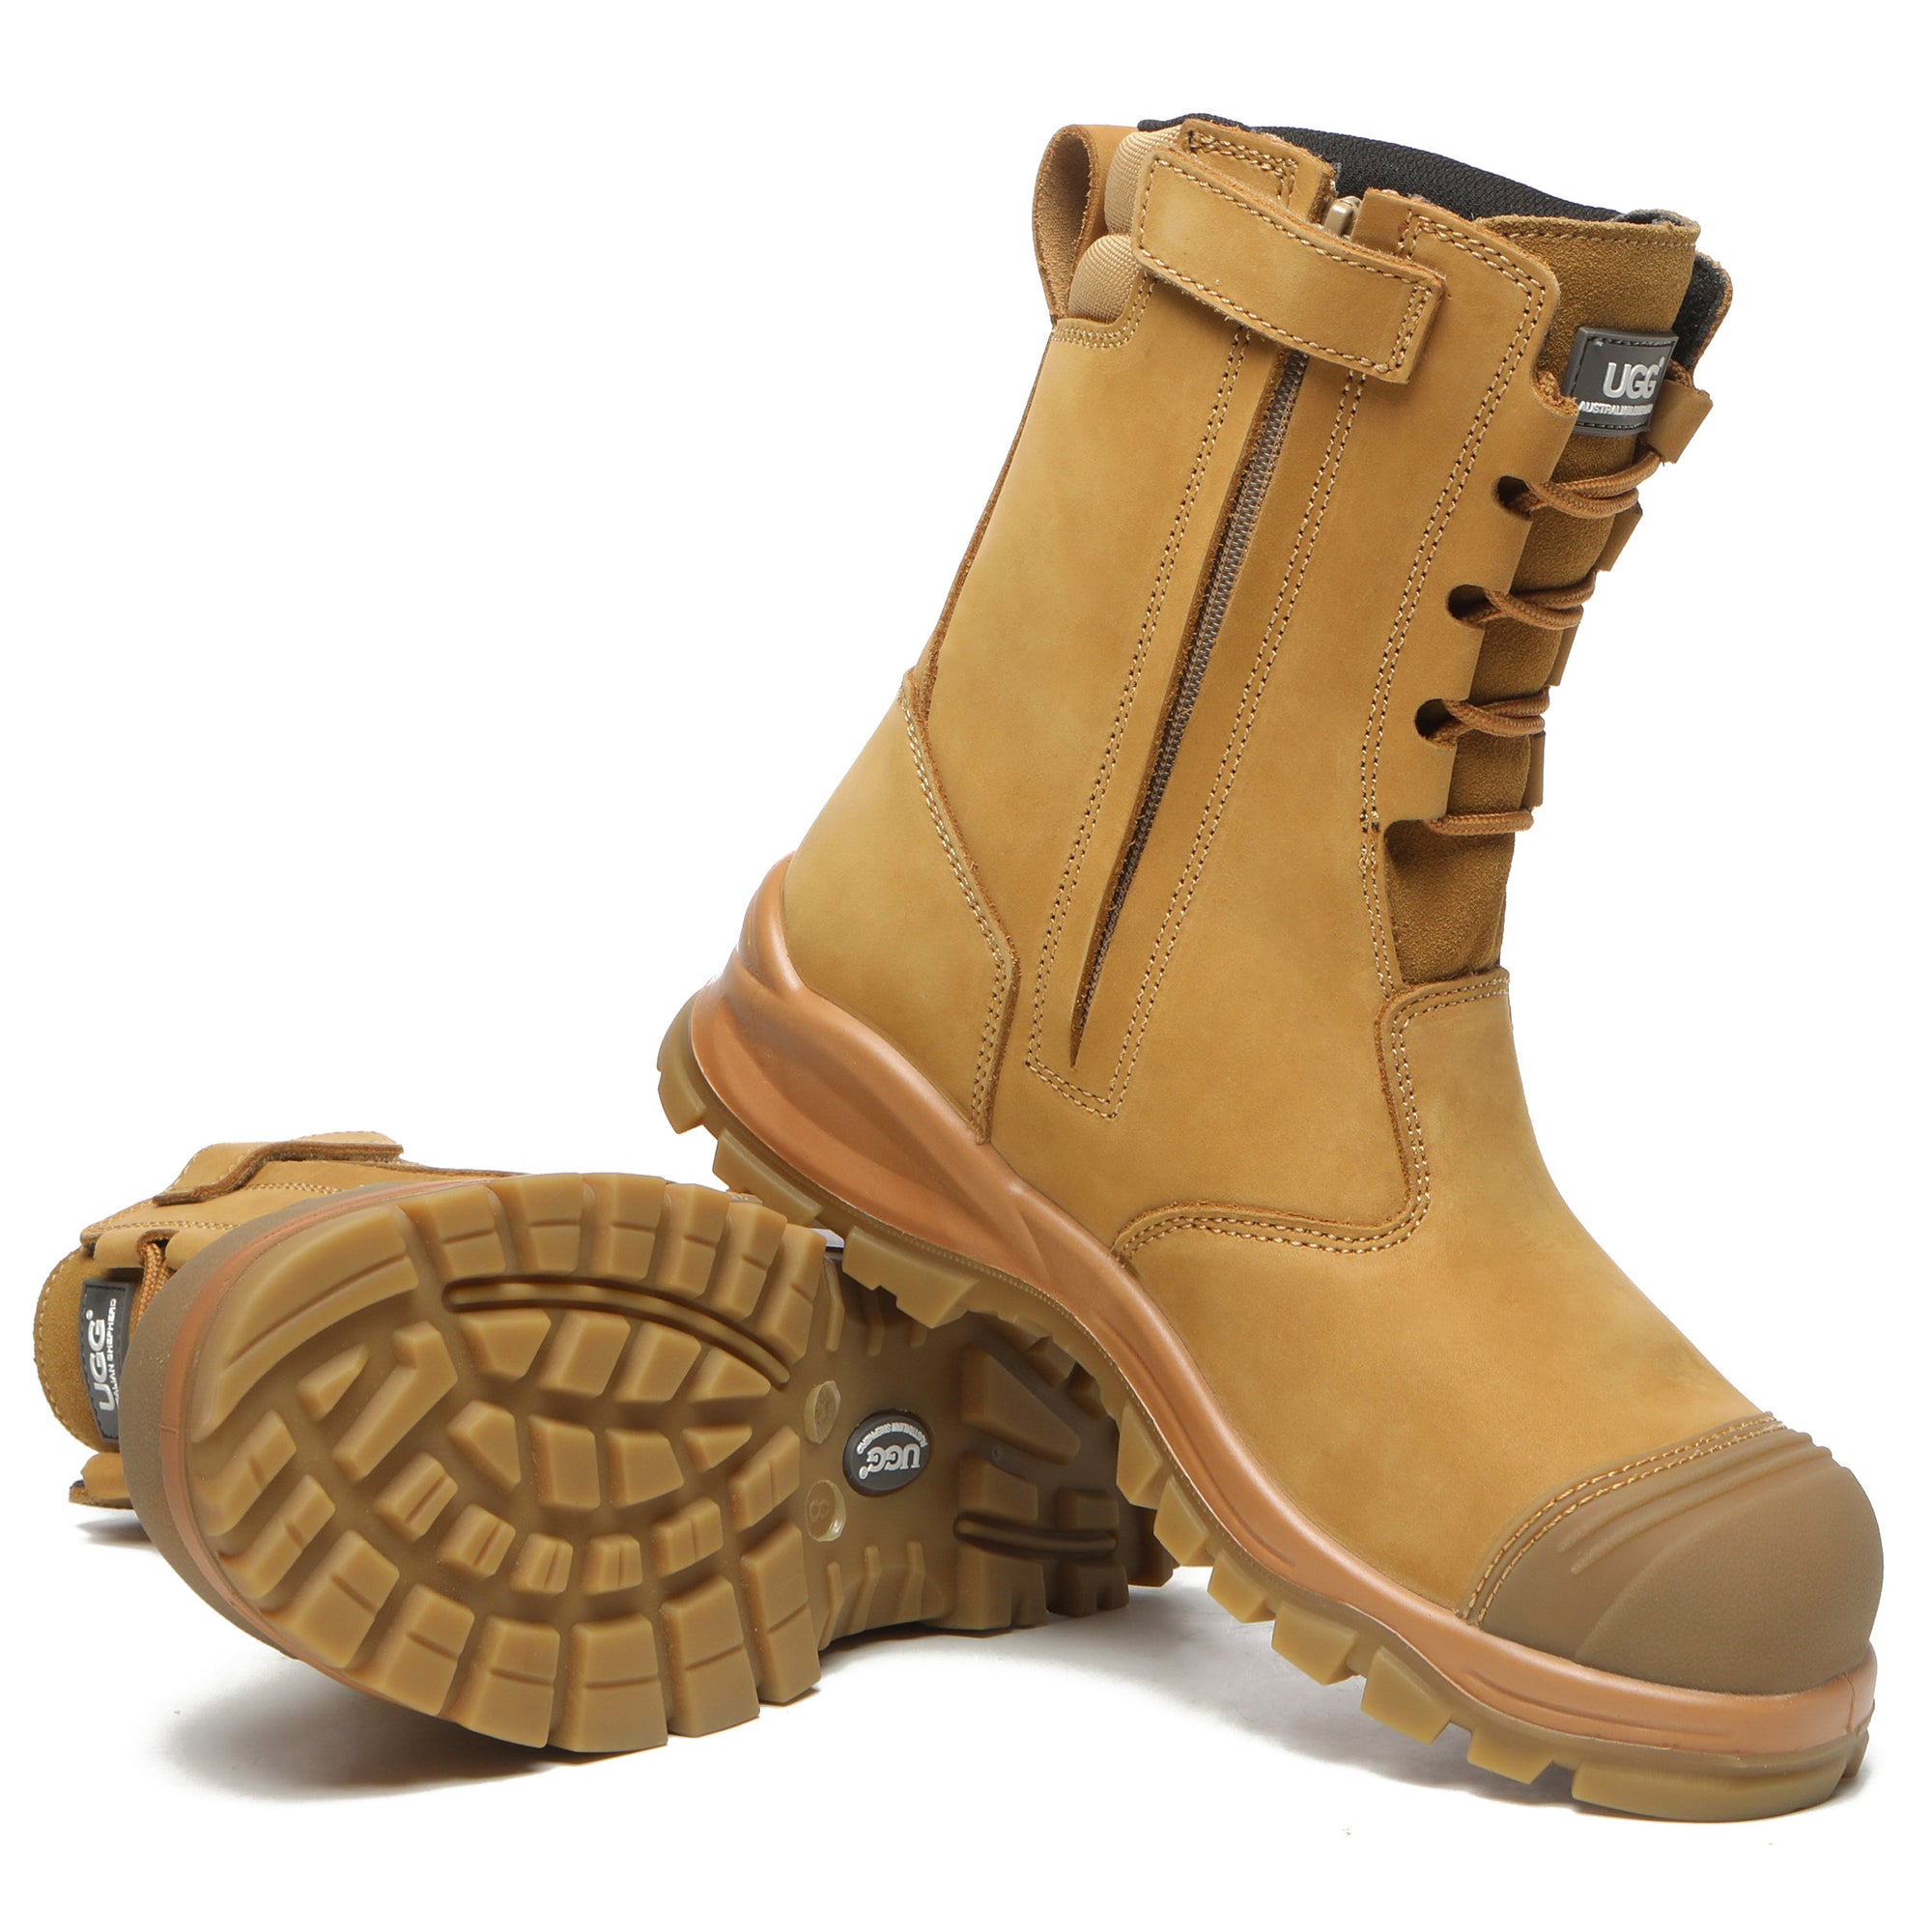 UGG Work Safety Boots Steel Toe Cap